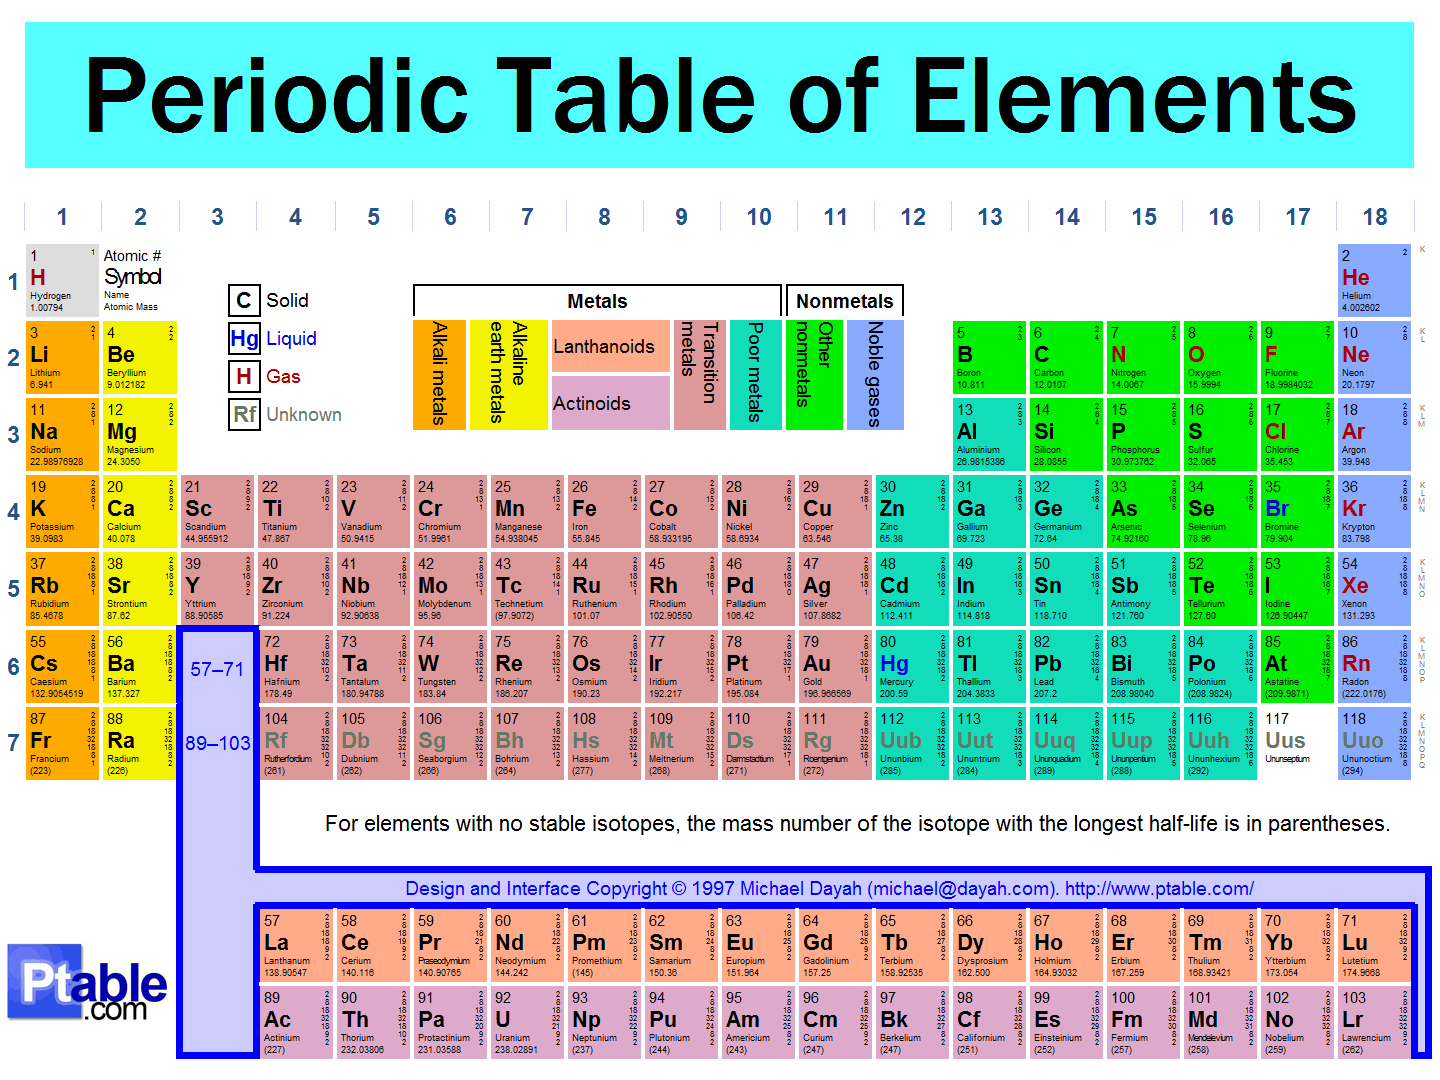 when-falls-the-coliseum-which-periodic-table-element-are-you